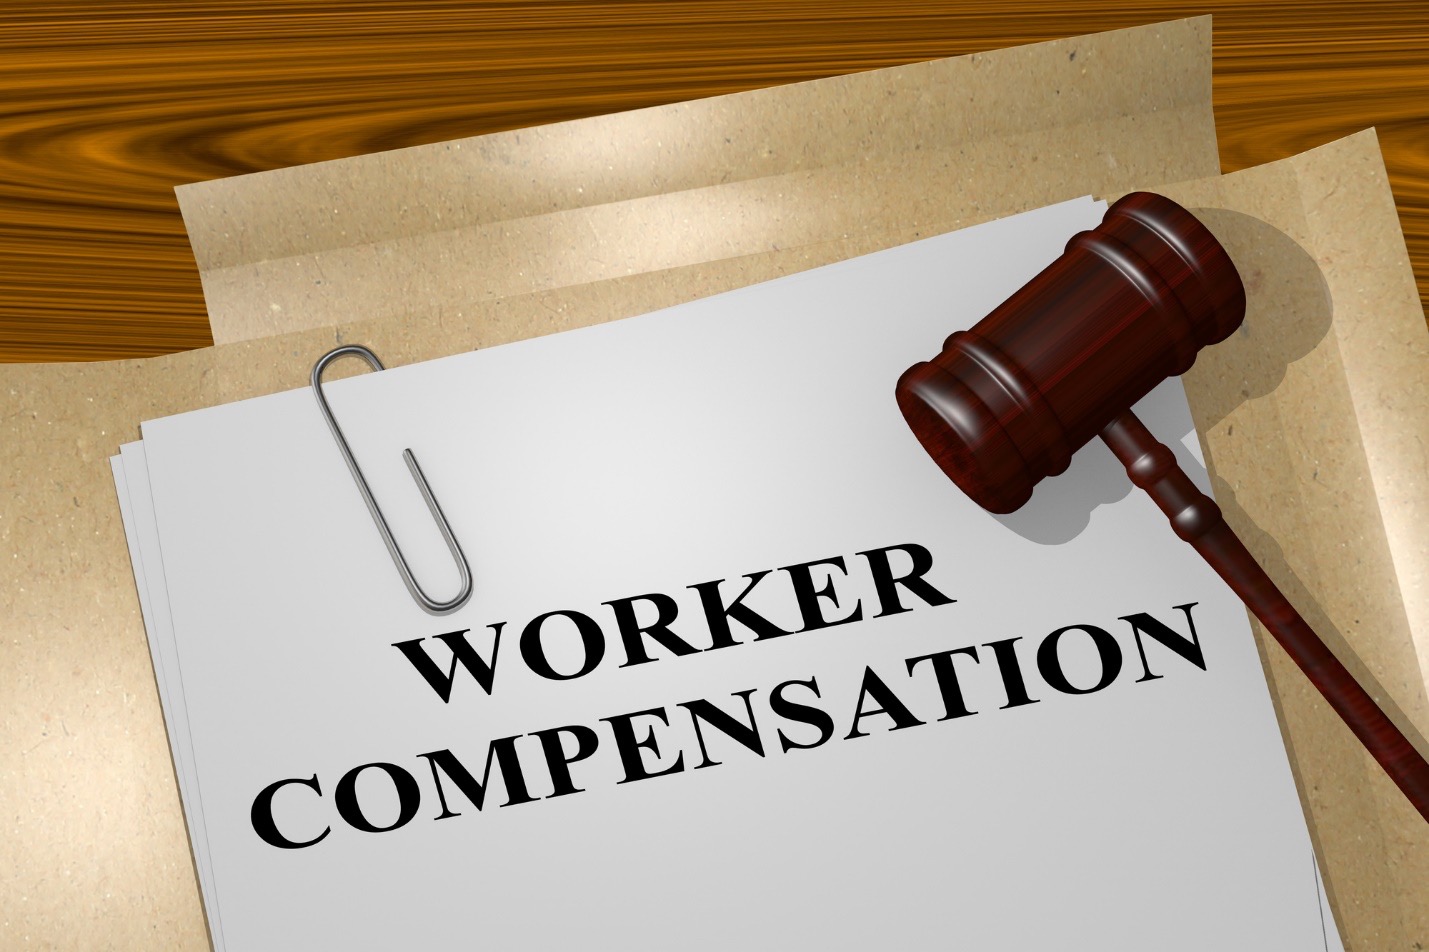 What's Covered by Workers' Compensation? - Careerbright.com